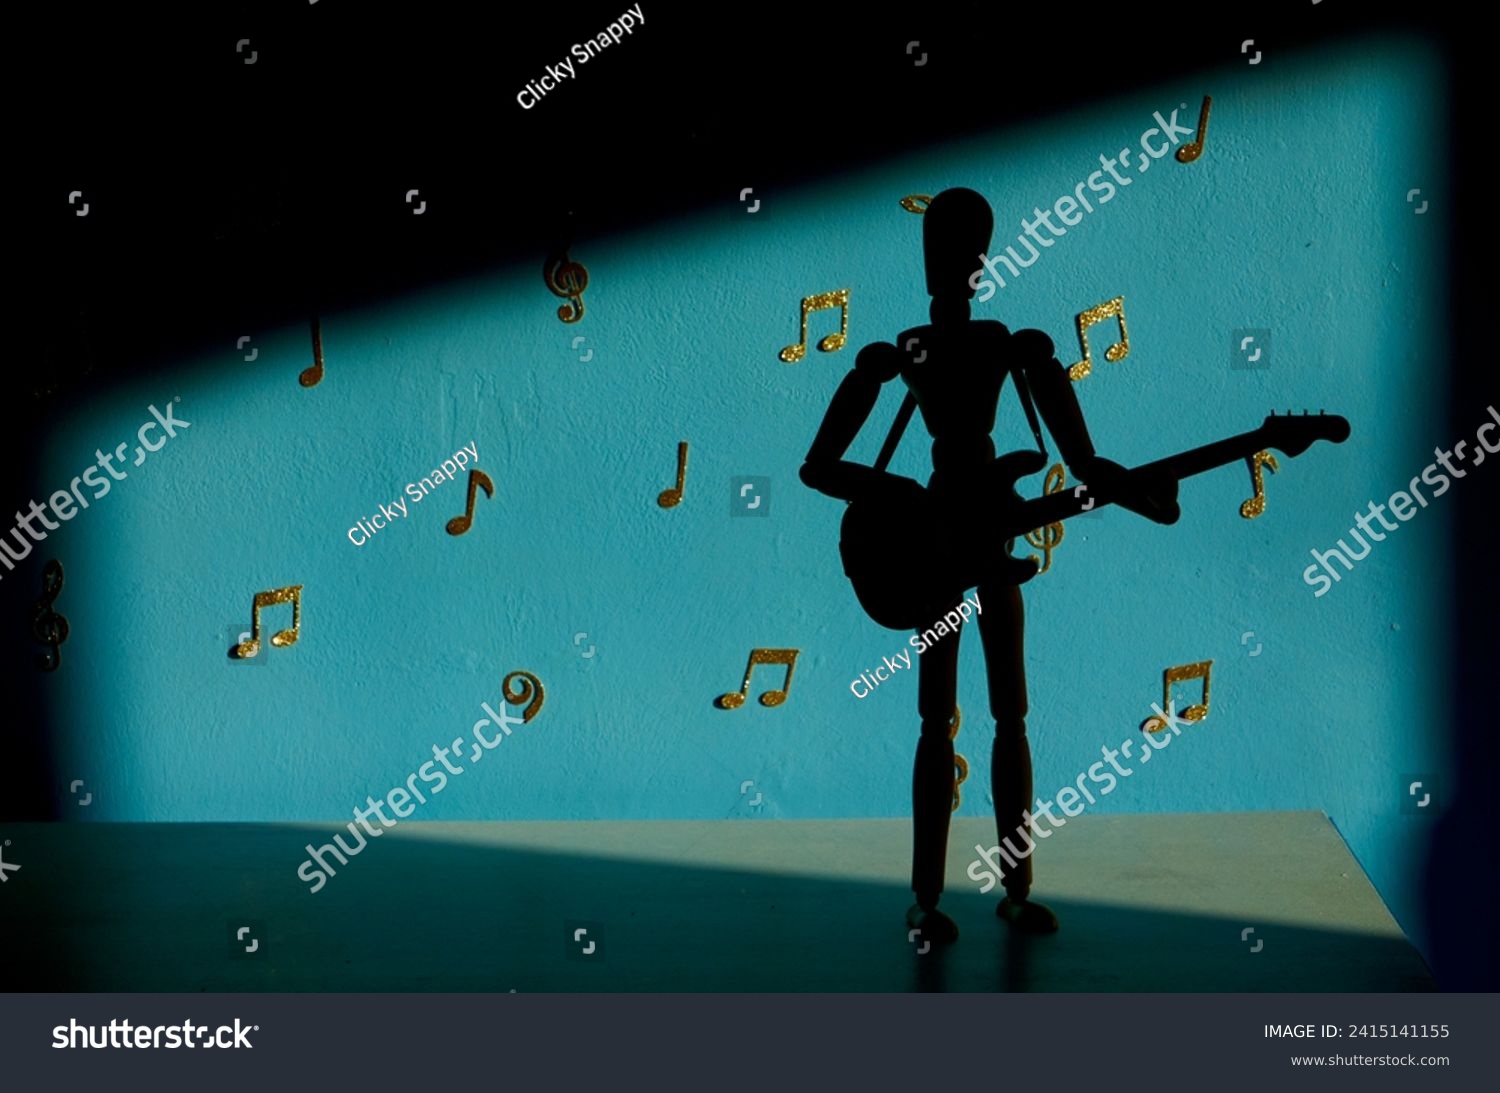 A 12 inch wooden drawing mannequin figure silhouette plays a bass guitar against a blue backdrop with gold musical notes and treble and bass clefs #2415141155